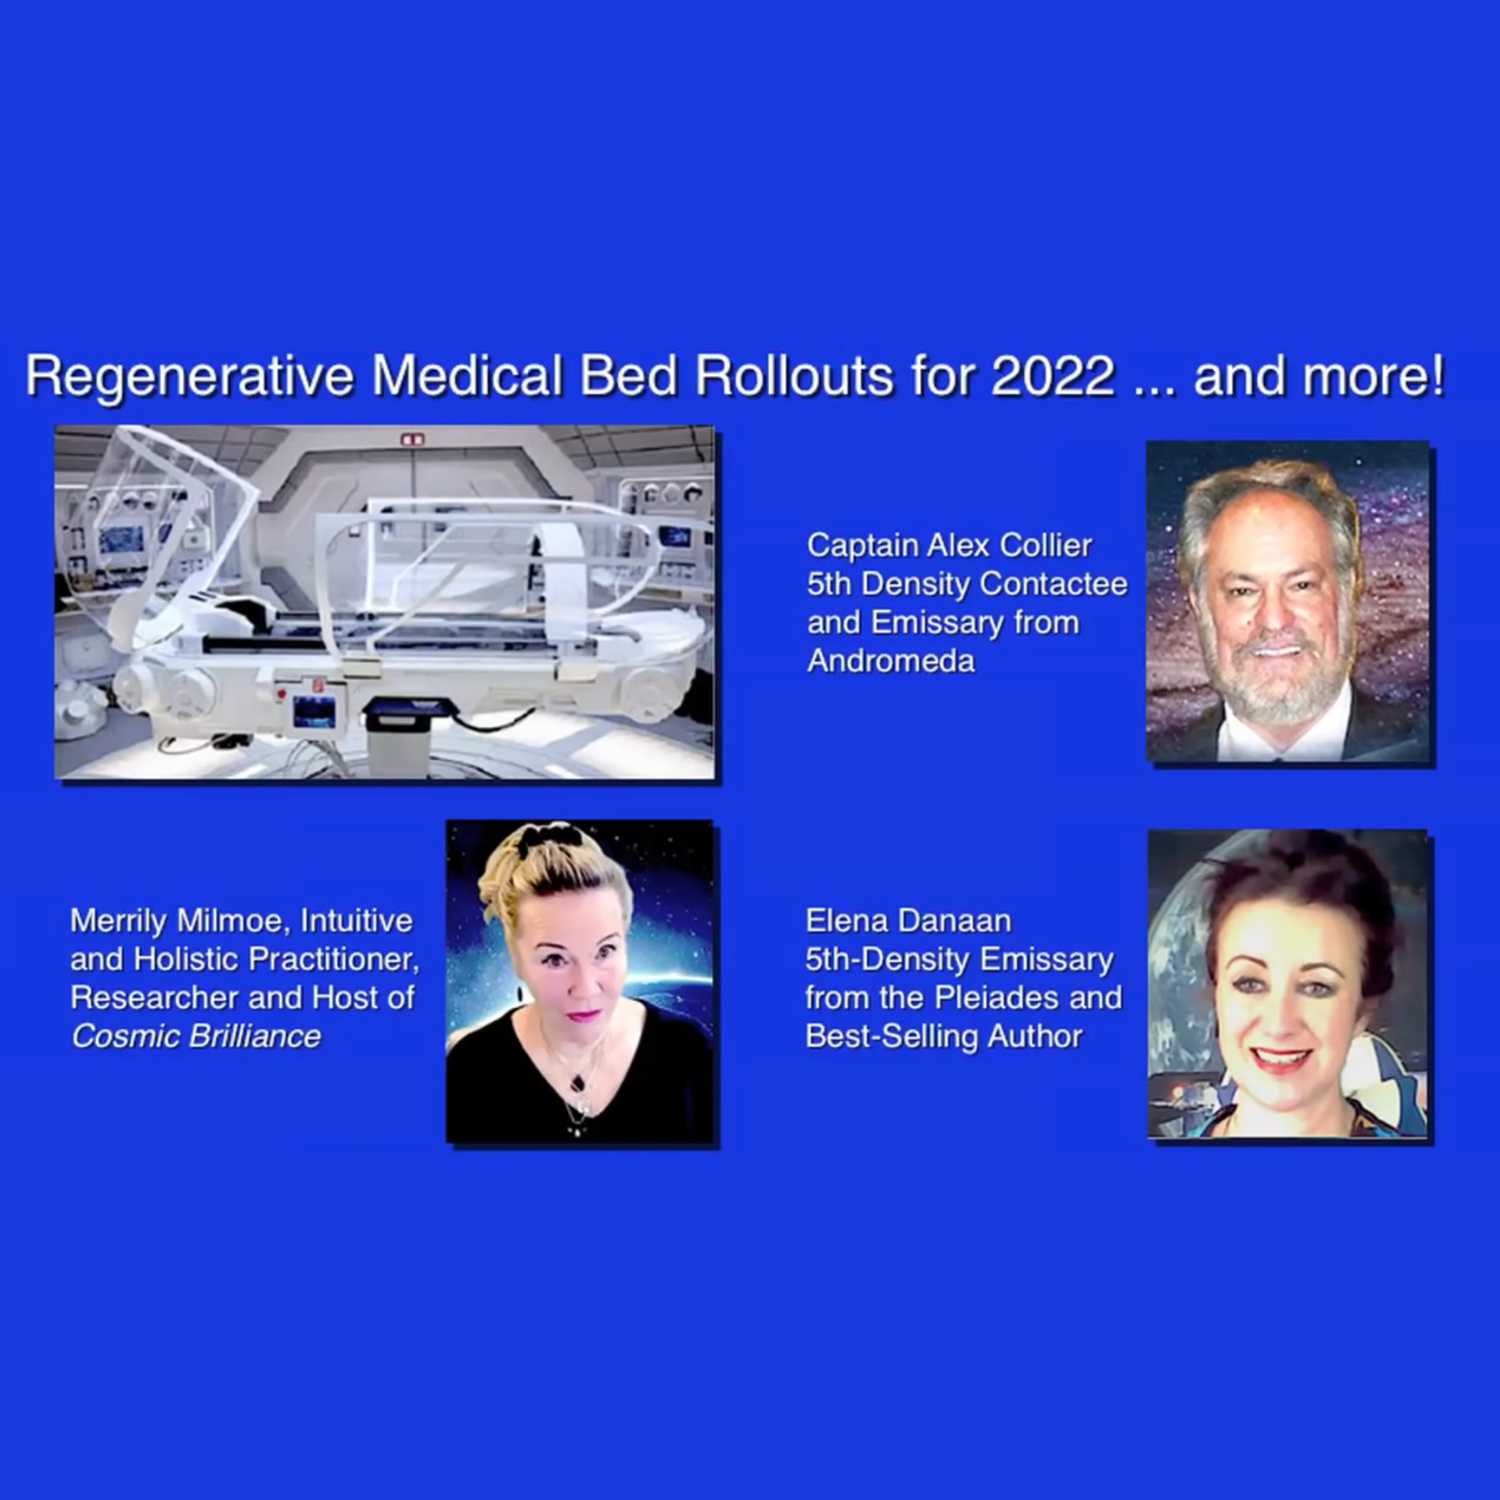 Regenerative Medical Bed Roll-Outs with Alex Collier & Elena Danaan